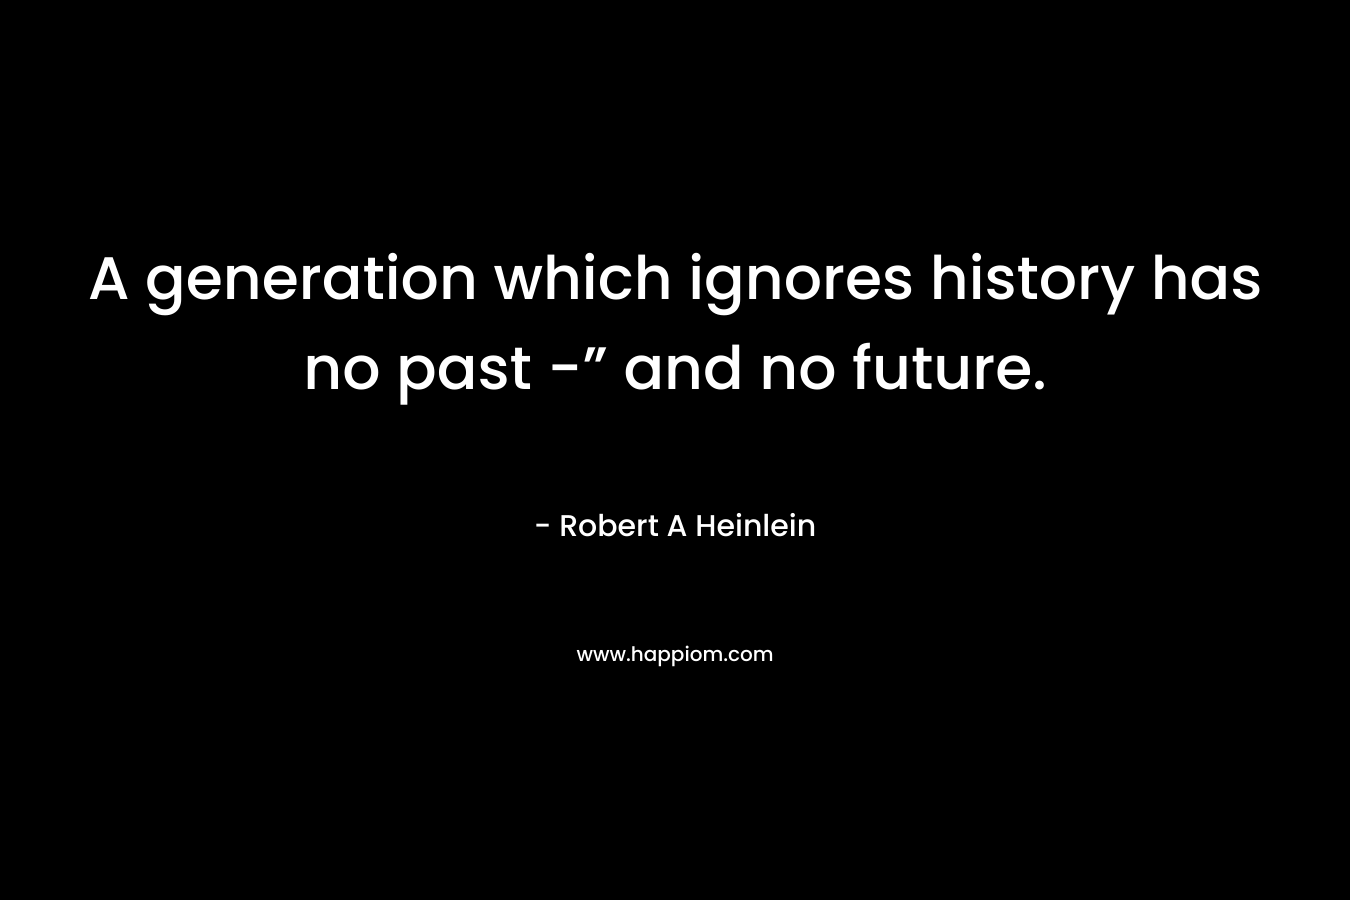 A generation which ignores history has no past -” and no future. – Robert A Heinlein